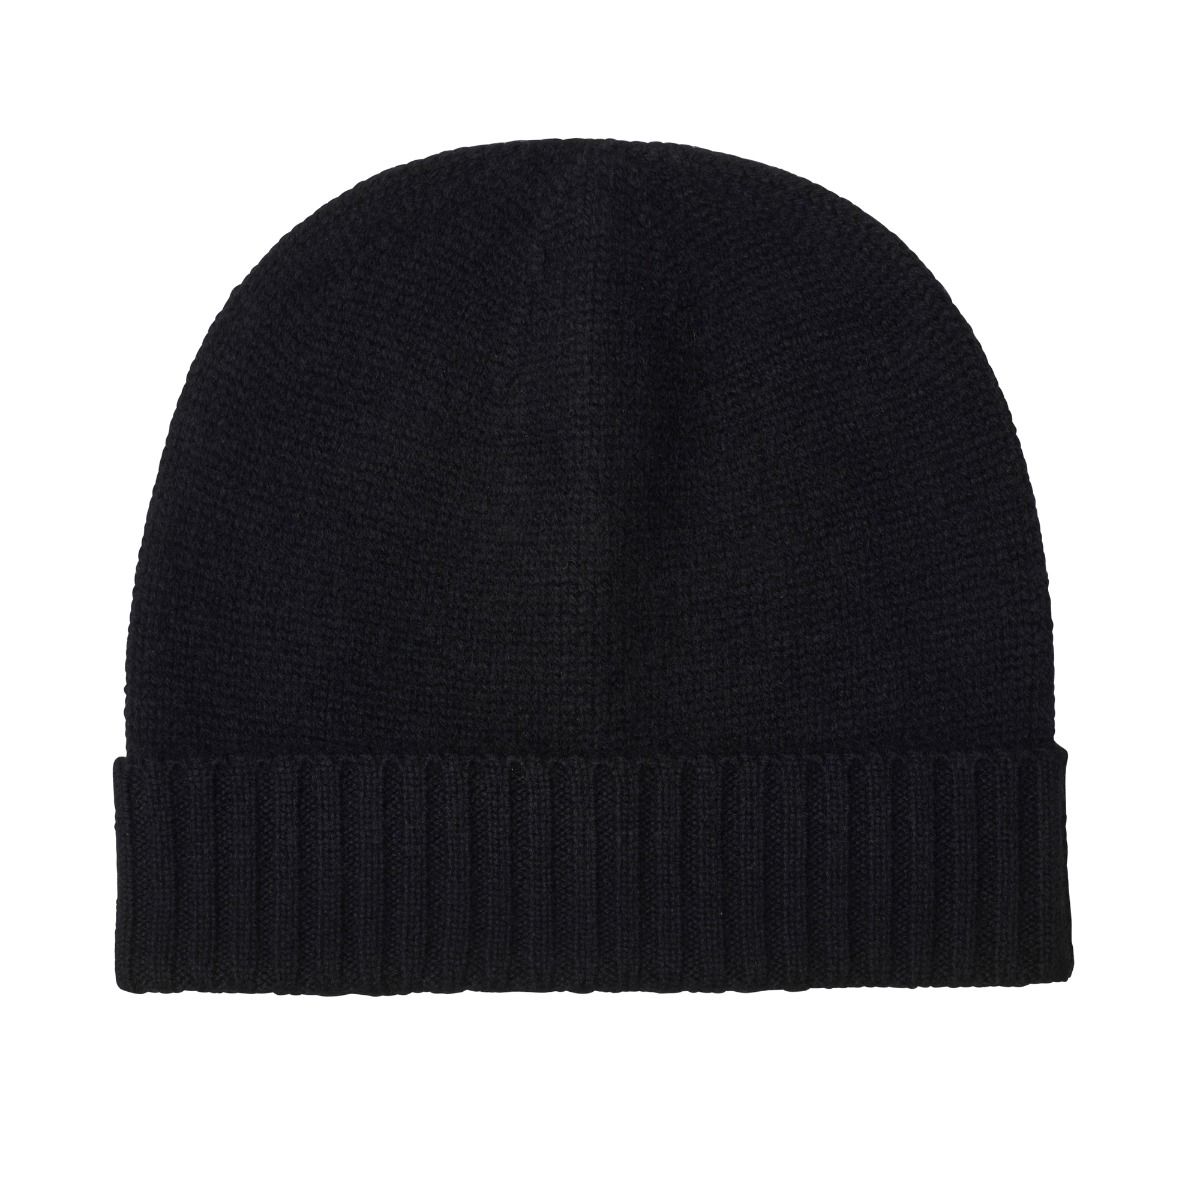 Black 4 Ply Cashmere Beanie Hat | Men's Country Clothing | Cordings